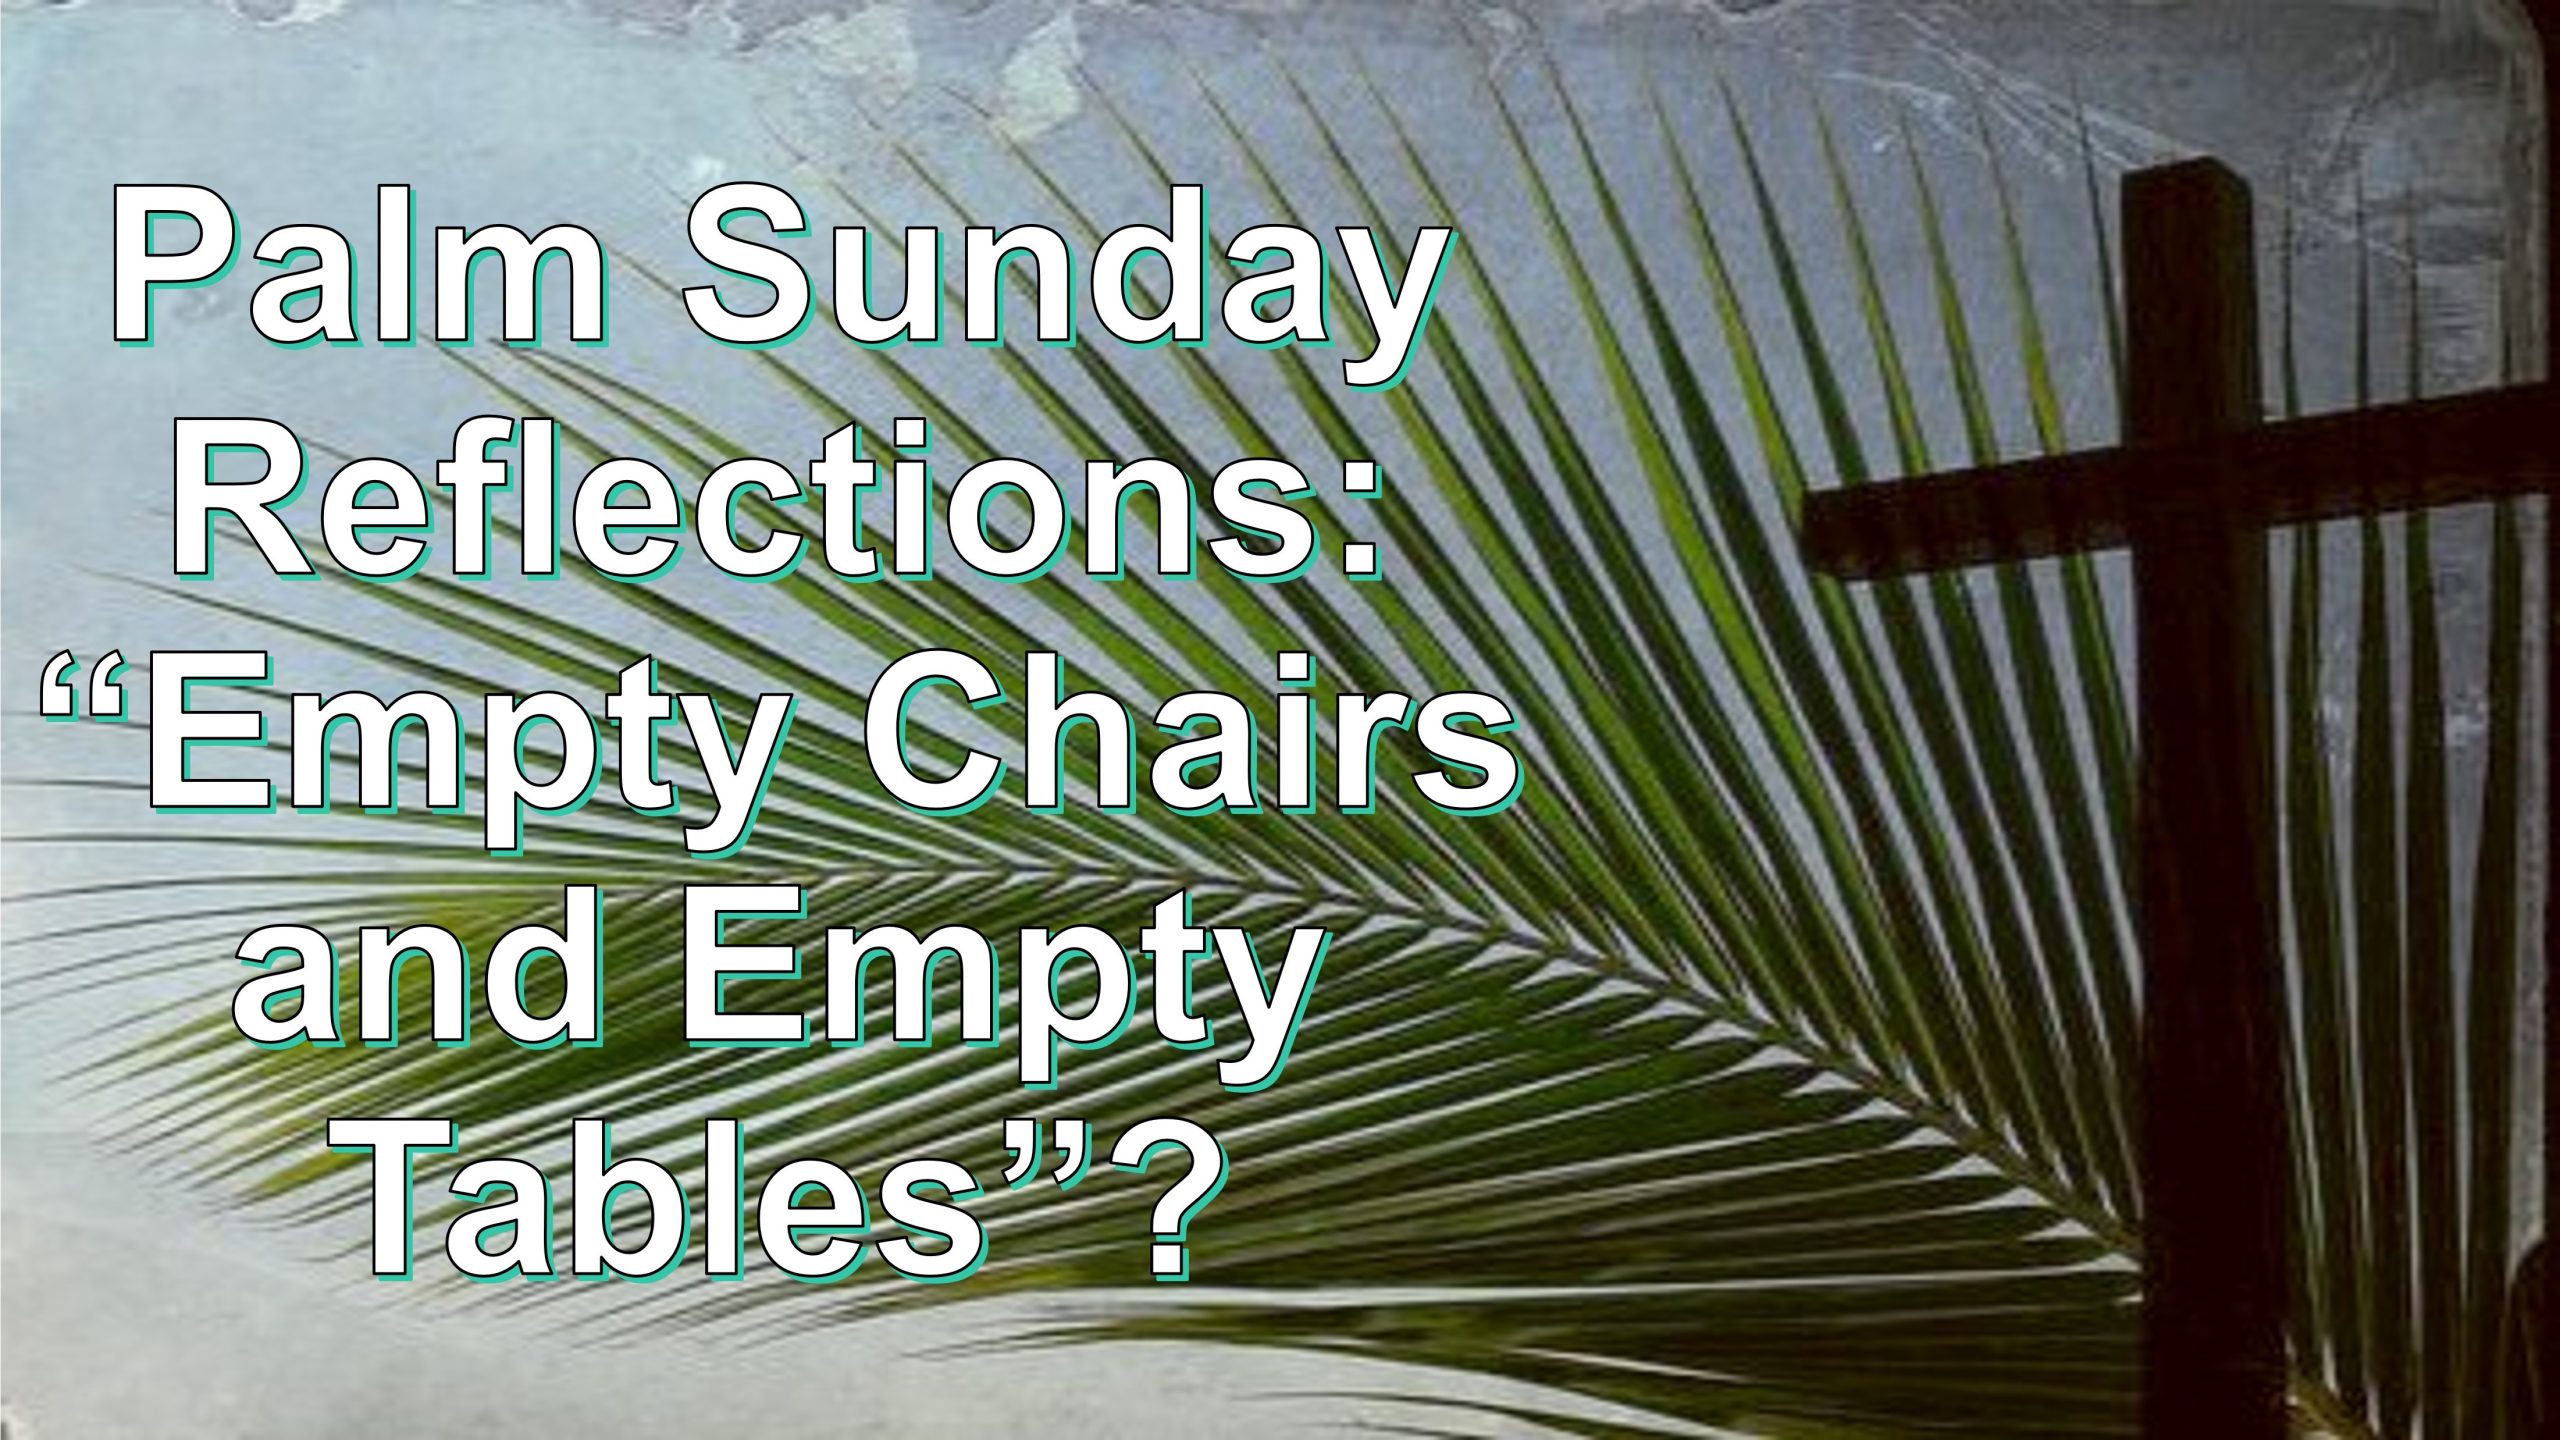 You are currently viewing Palm Sunday Reflections: “Empty Chairs & Empty Tables”? – April 2nd